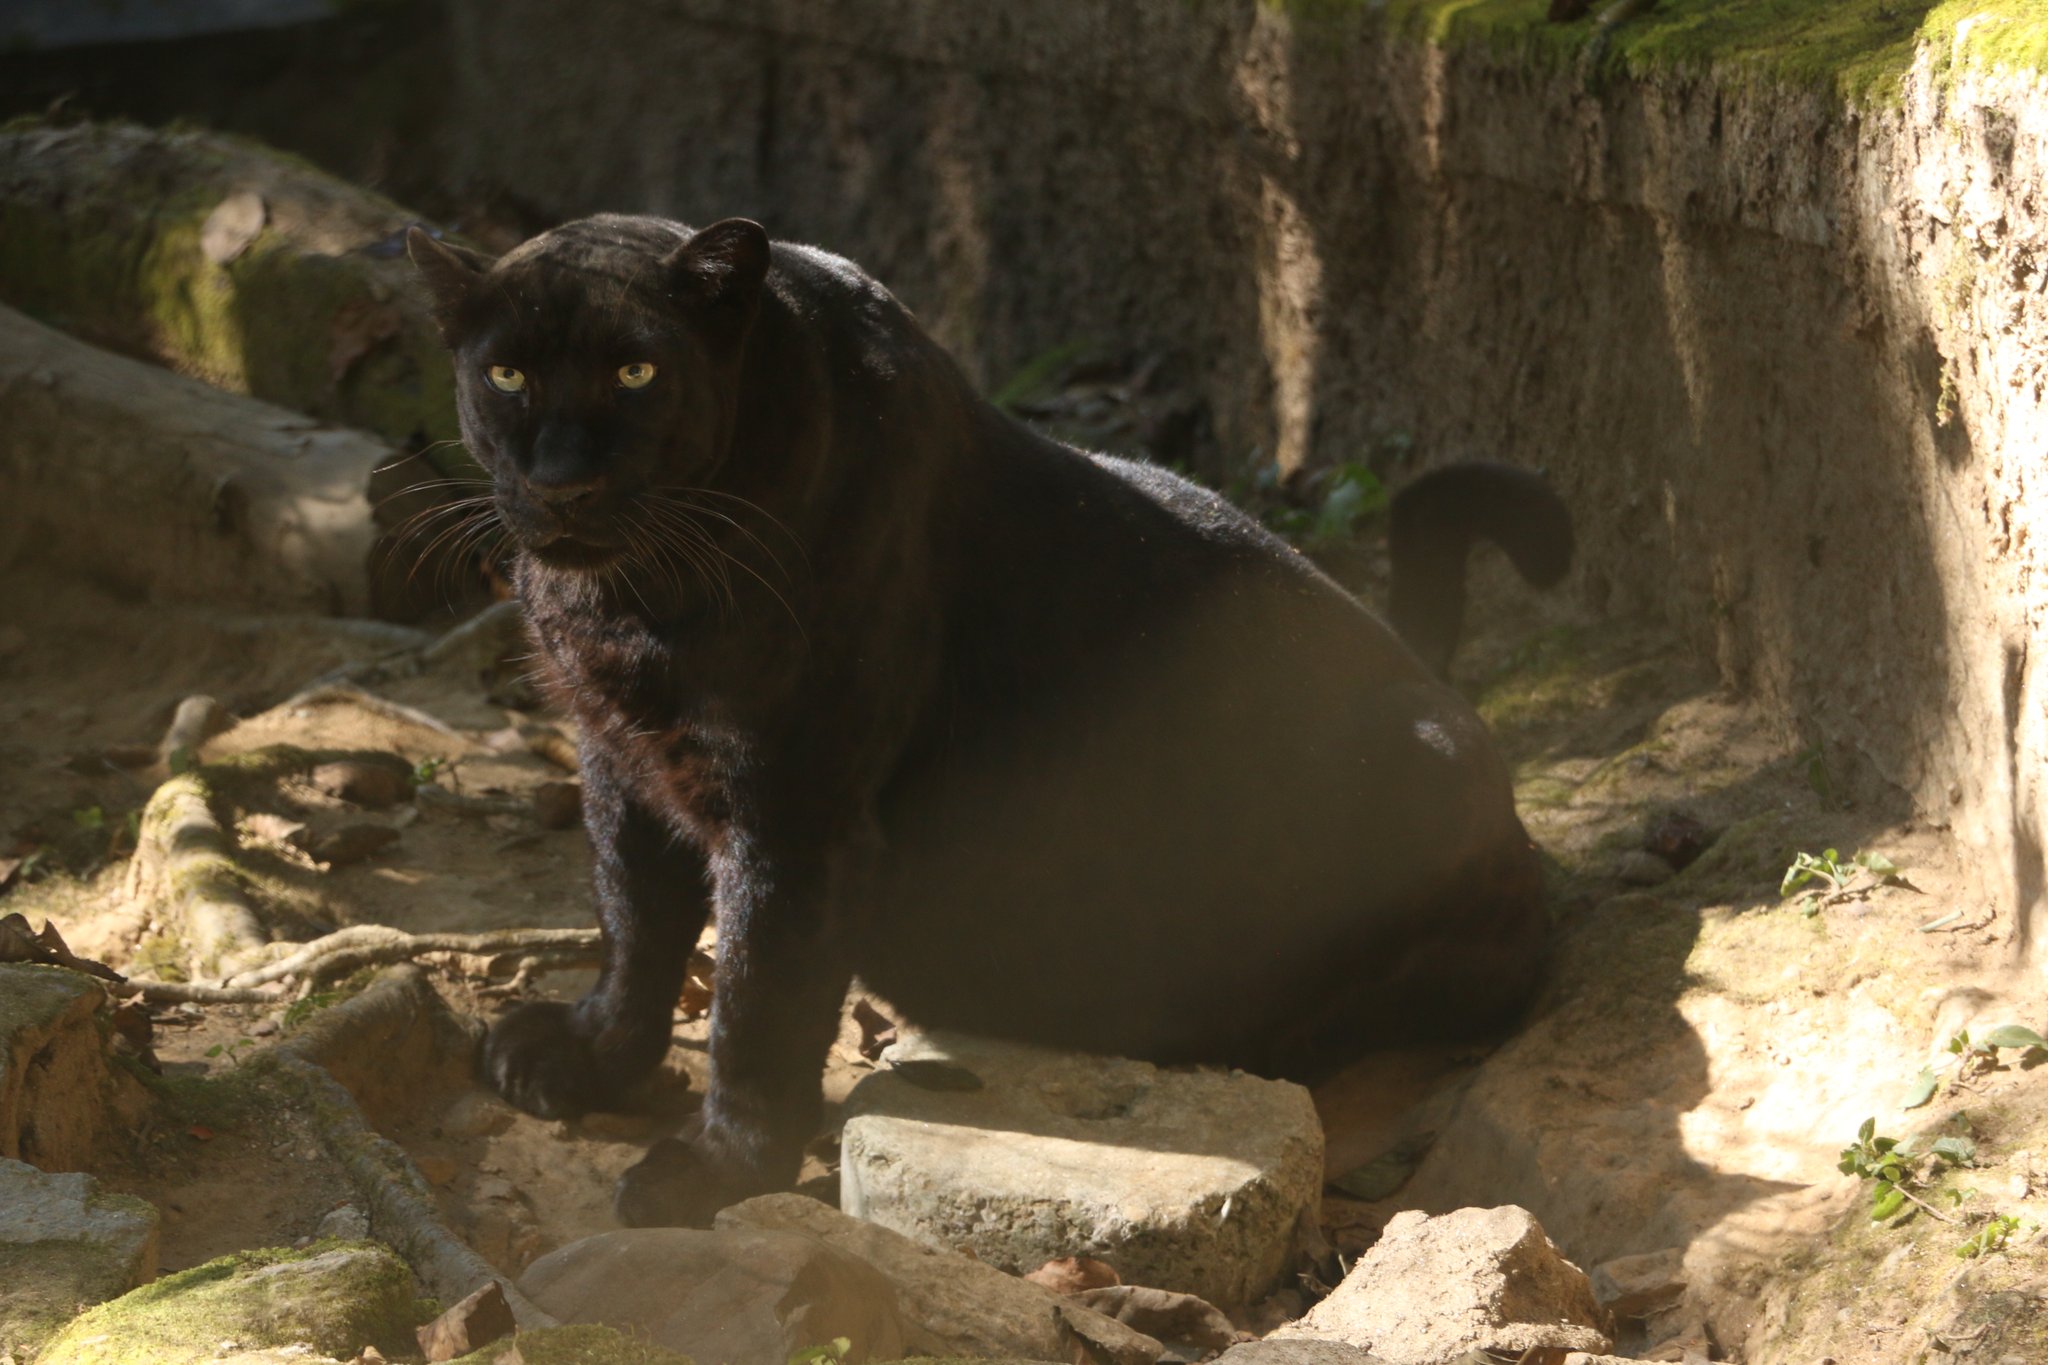 All About the Black Panther: Ghosts of the Forest